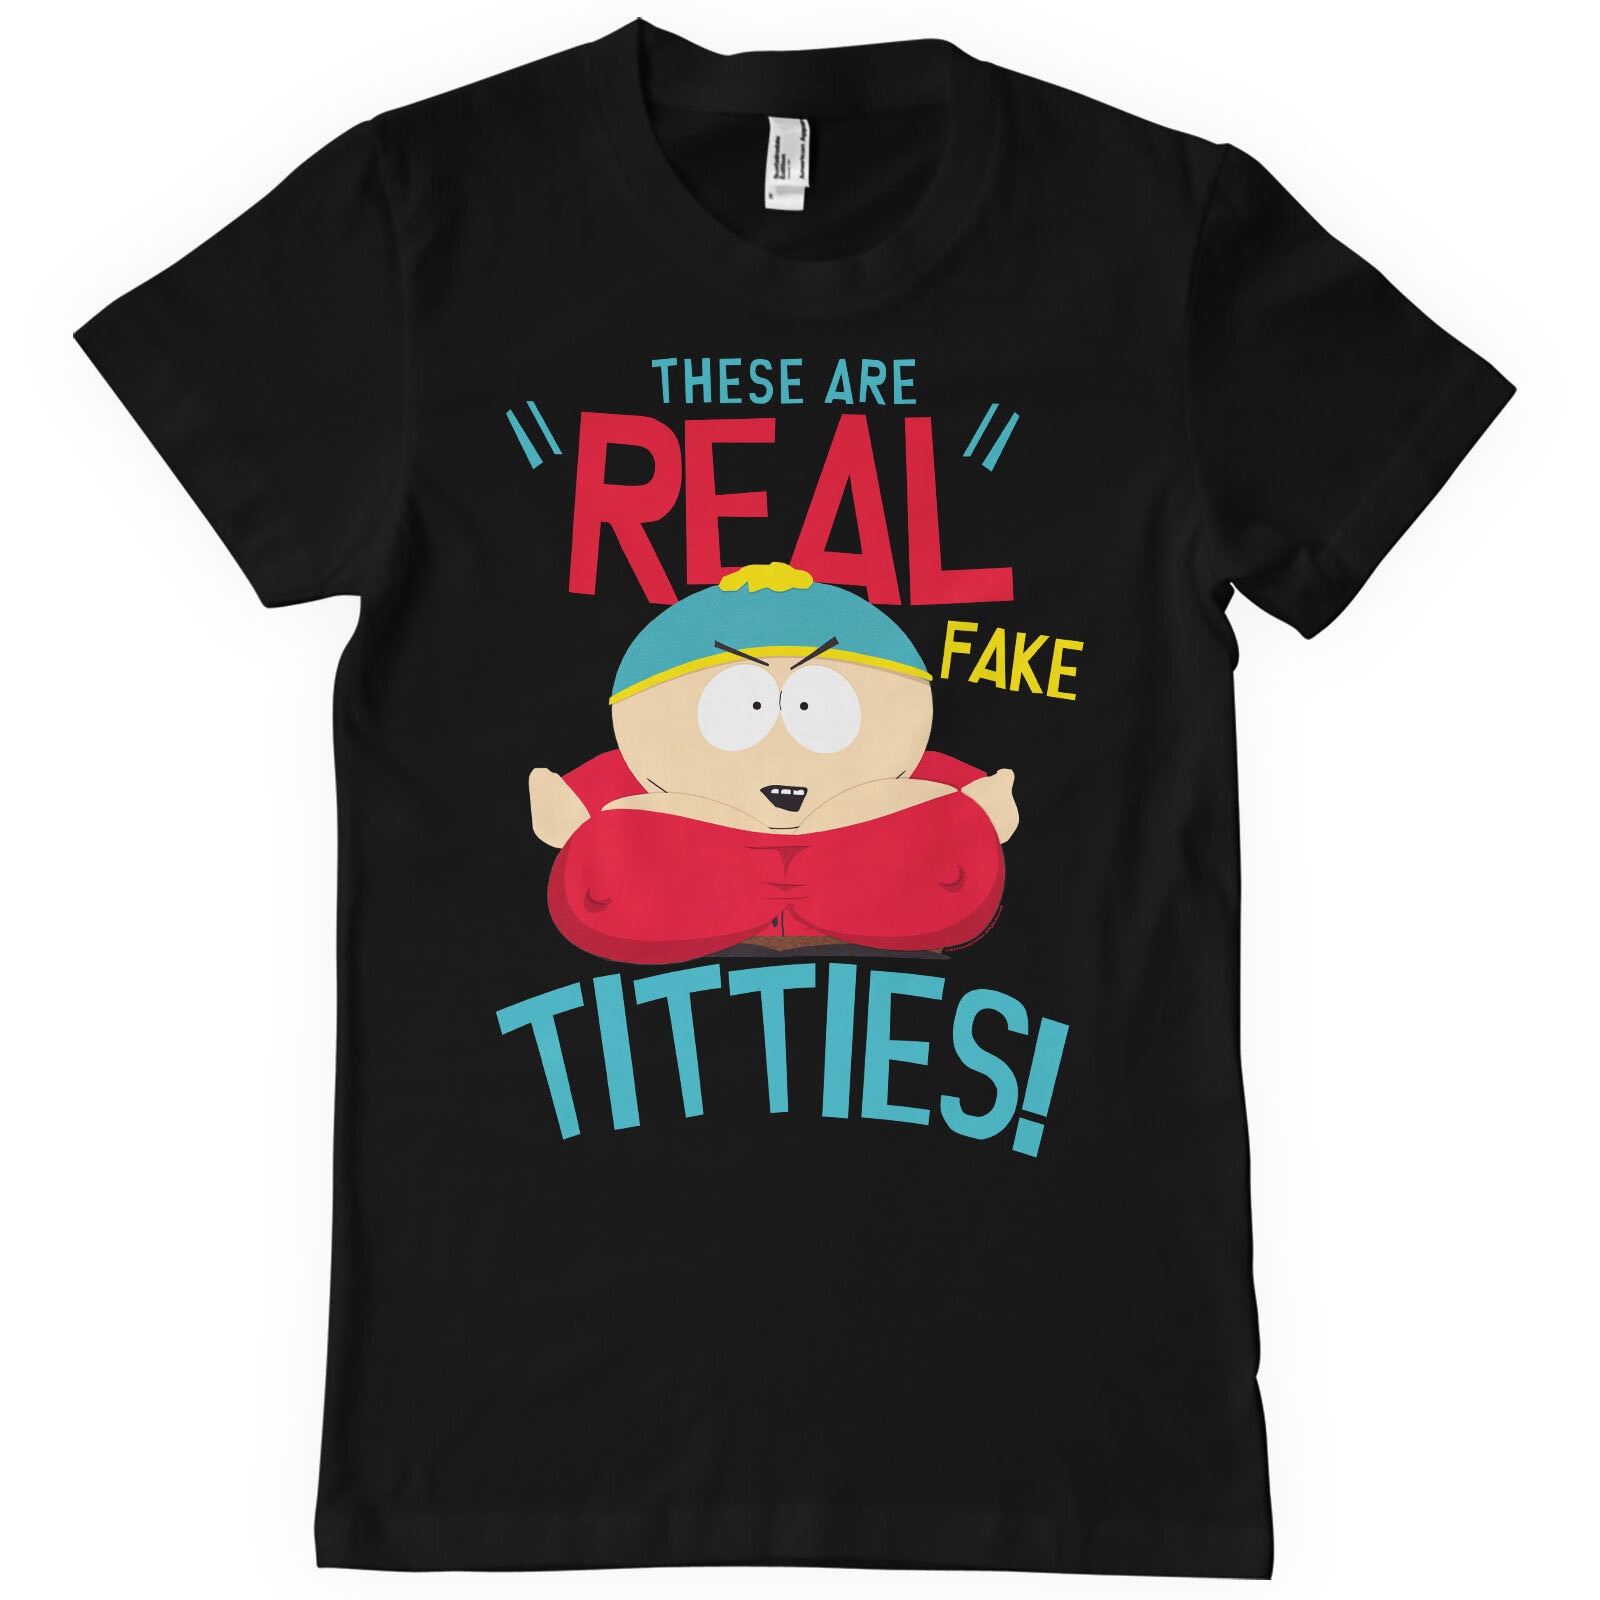 These Are Real Fake Titties T-Shirt